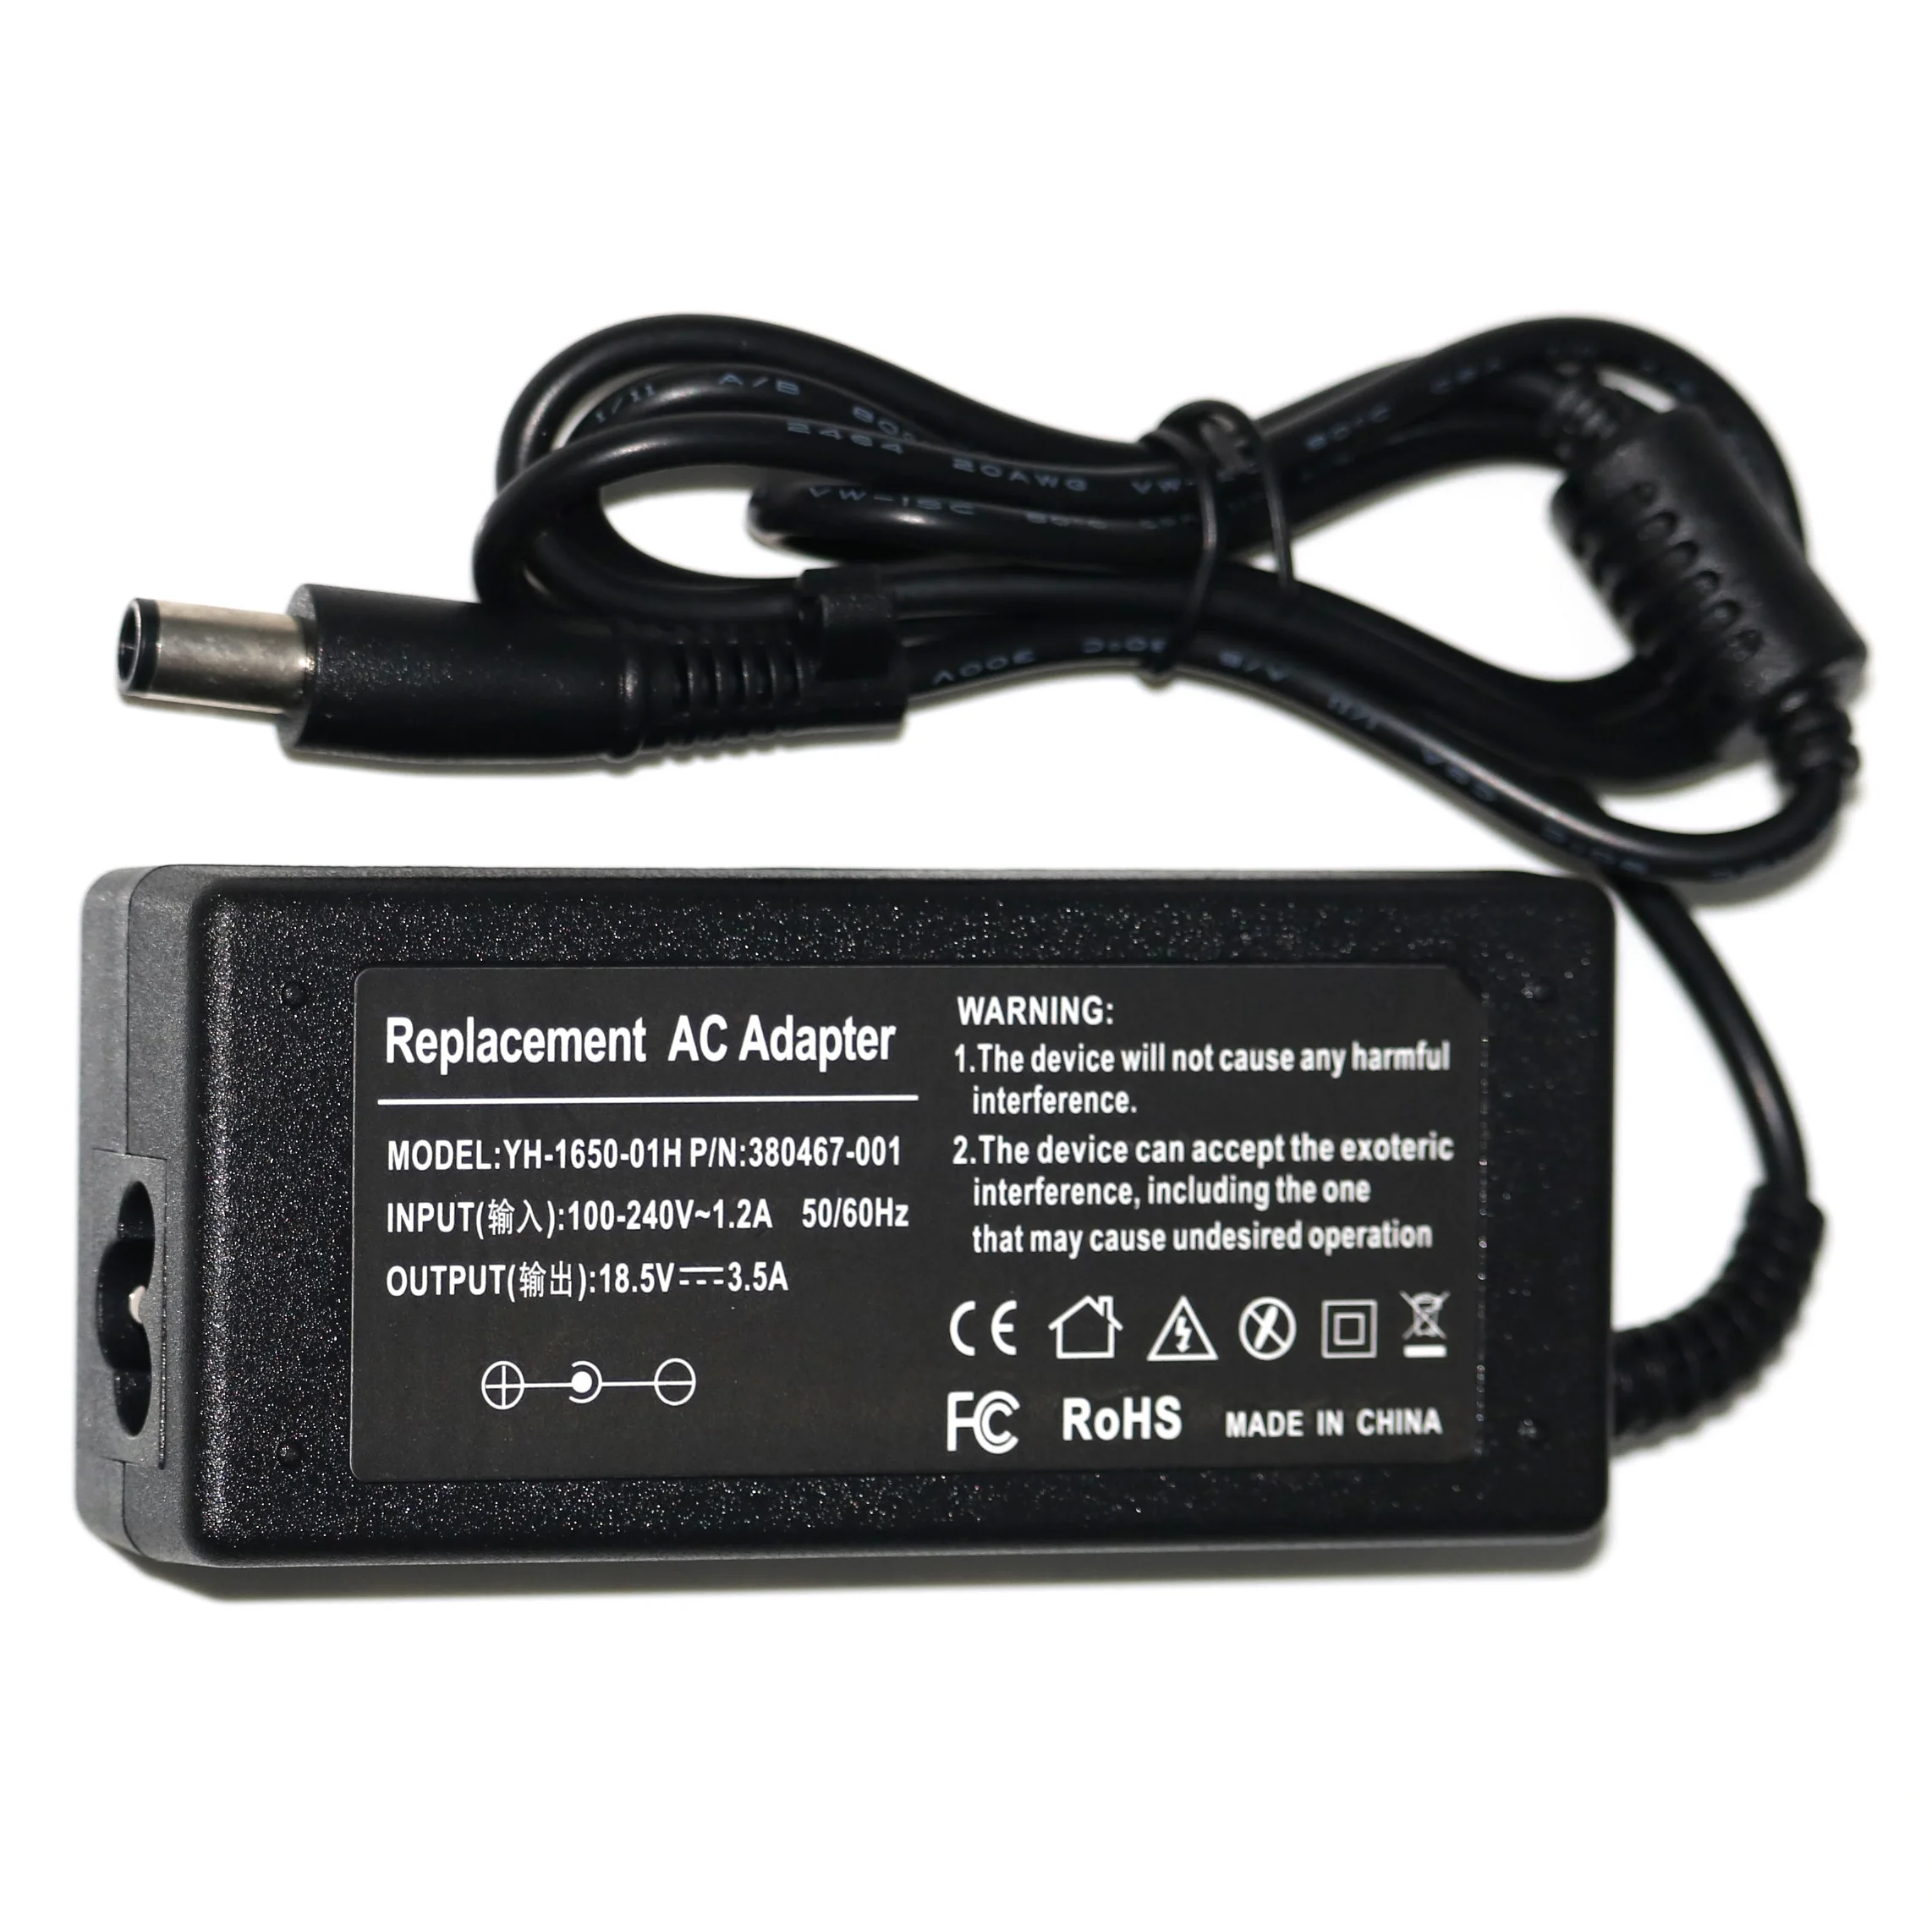 

18.5V 3.5A AC Adapter Power Supply Charger for HP Pavilion G6 G56 CQ60 DV6 G62 G70 G71 G72 2133 2533t 530 510 2230s 7.4*5.0mm